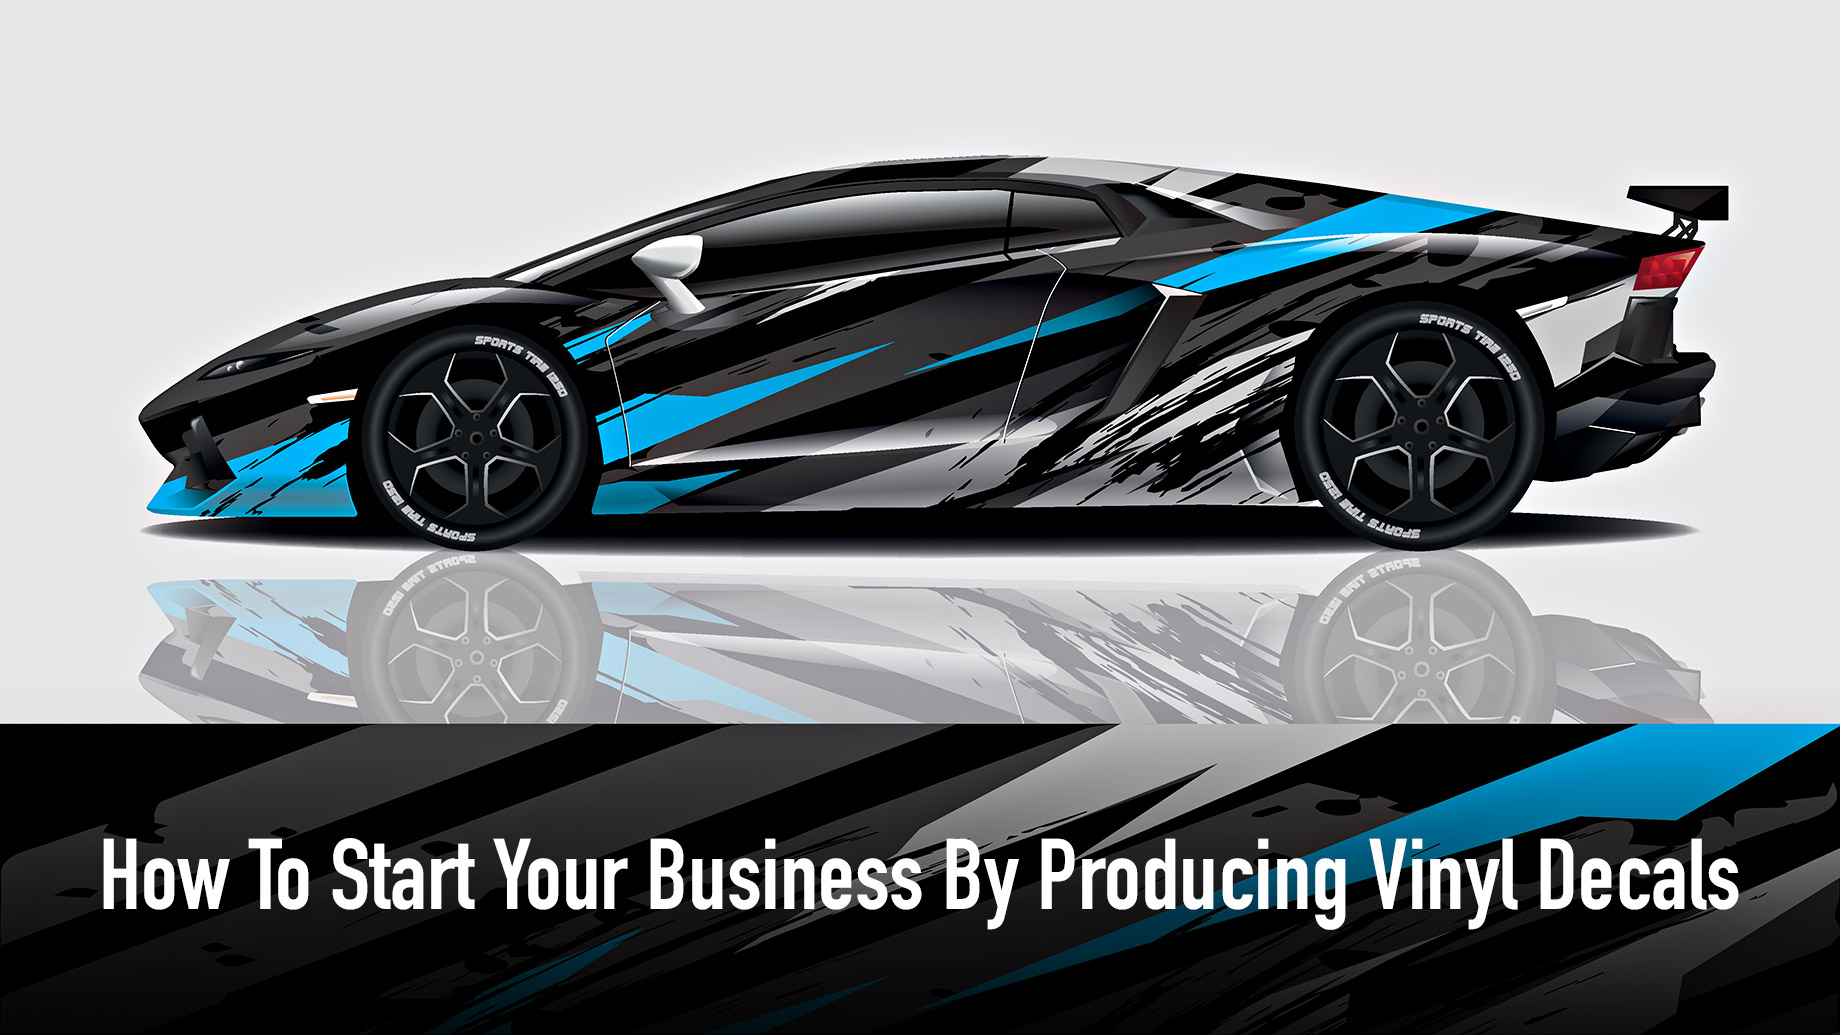 How To Start Your Business By Producing Vinyl Decals